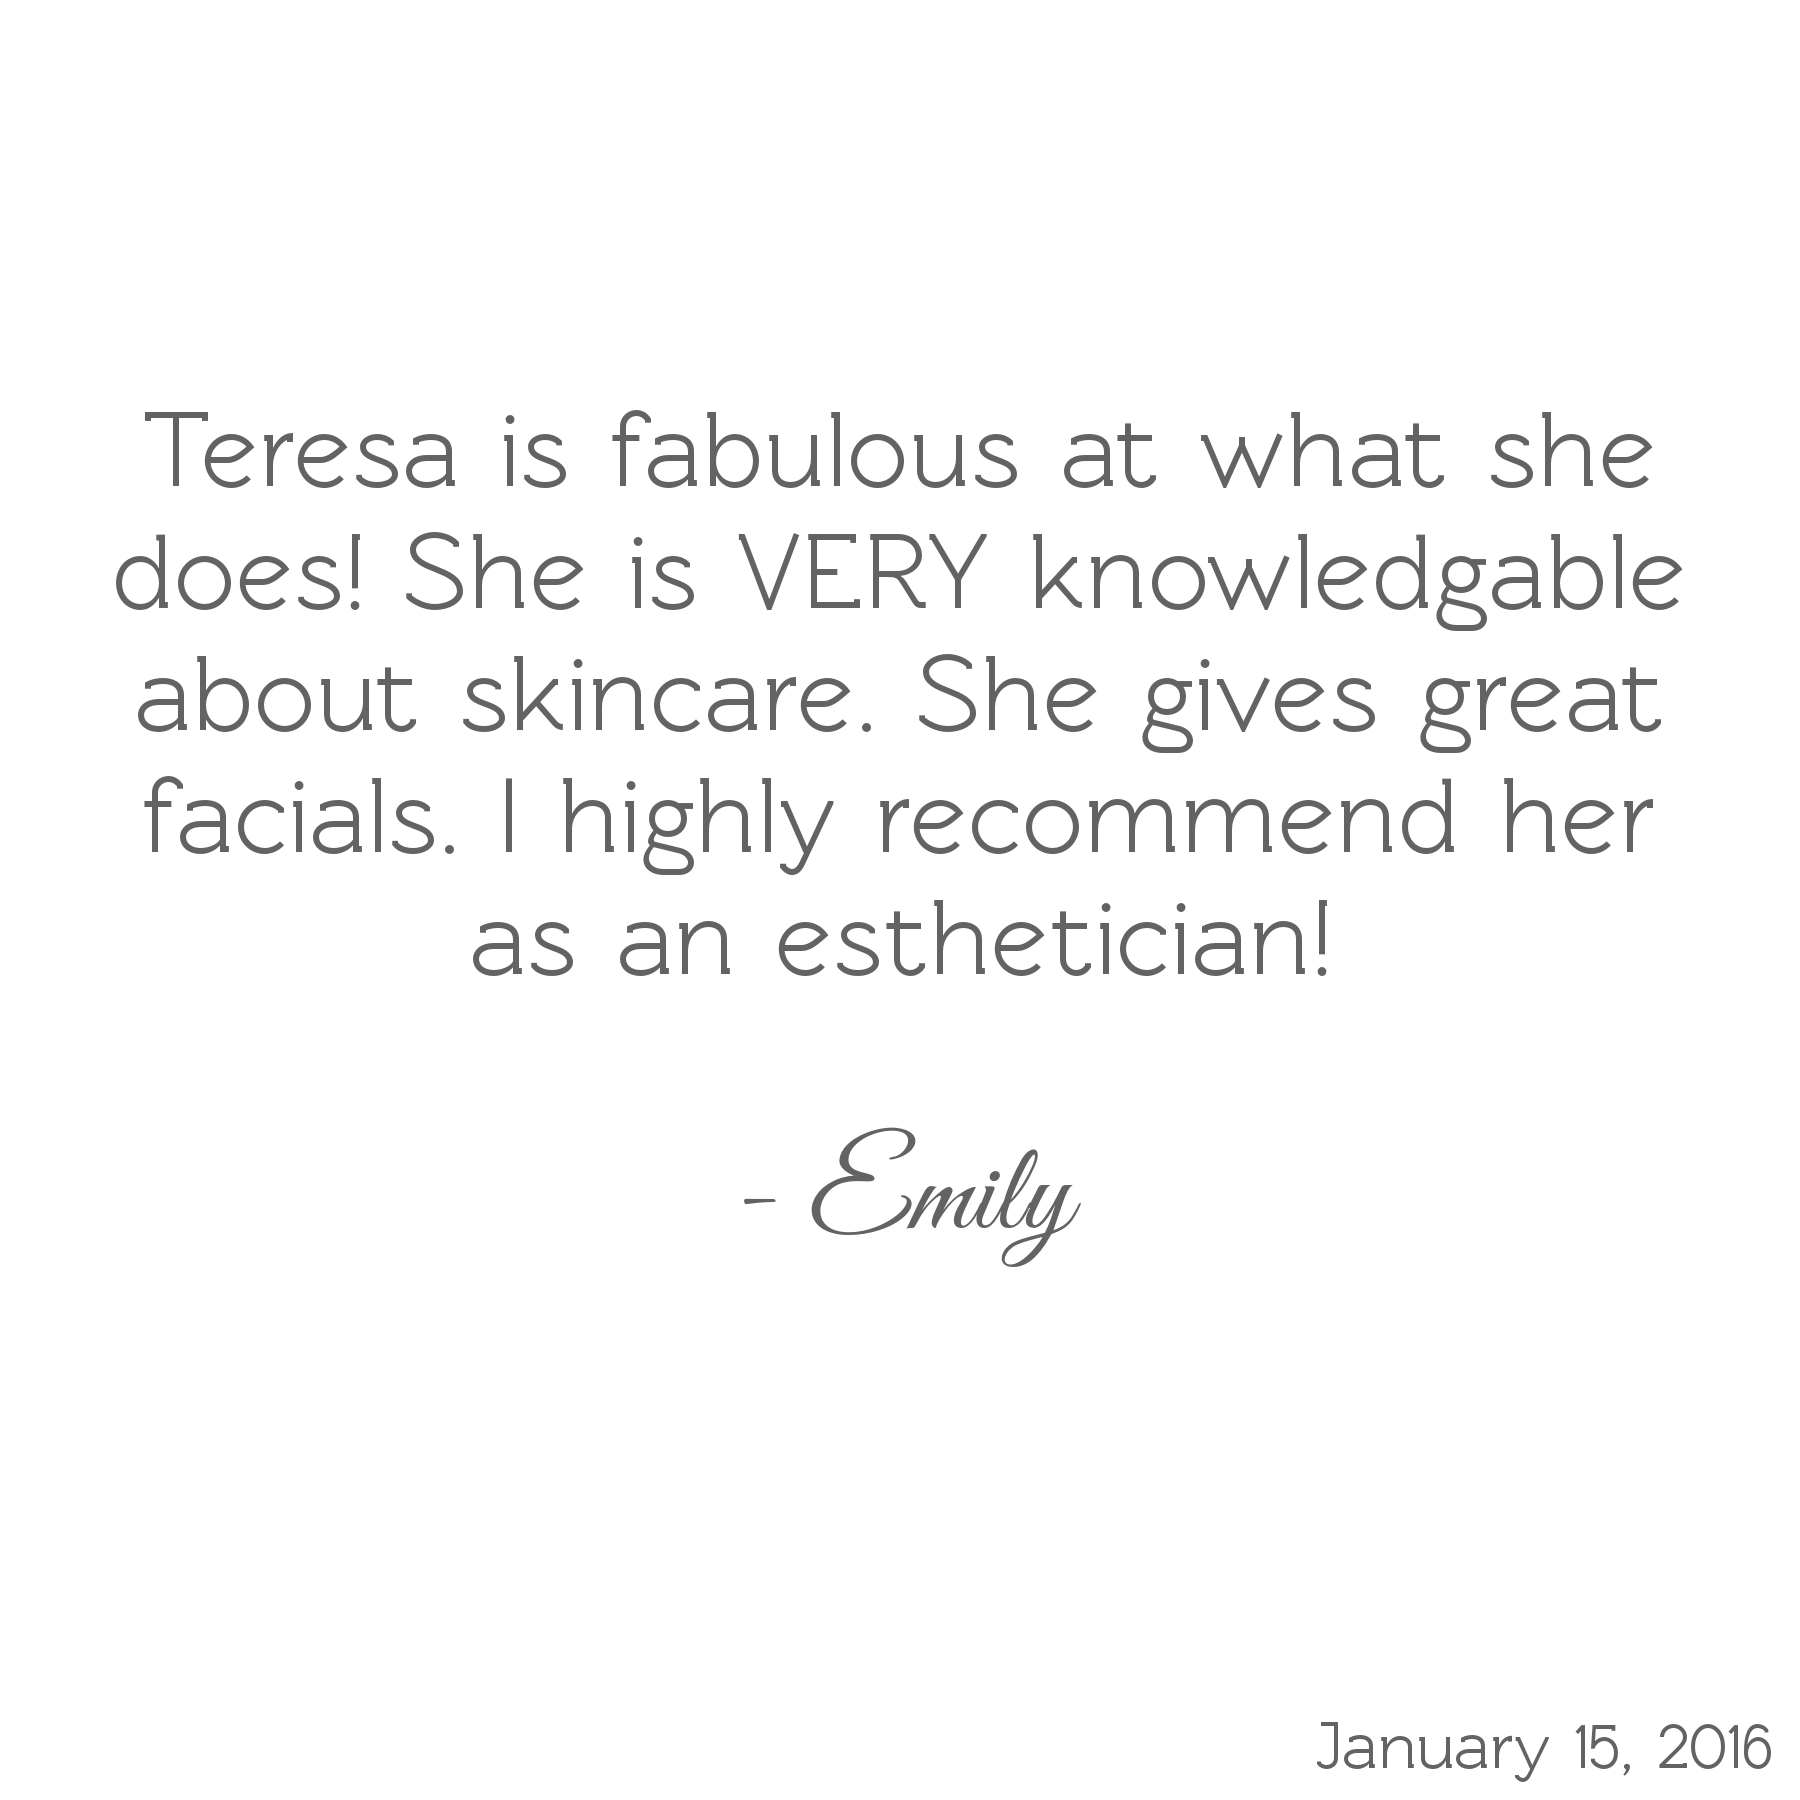 Teresa is fabulous at what she does! She is VERY knowledgeable about skincare. She gives great facials. I highly recommend her as an esthetician! -Emily